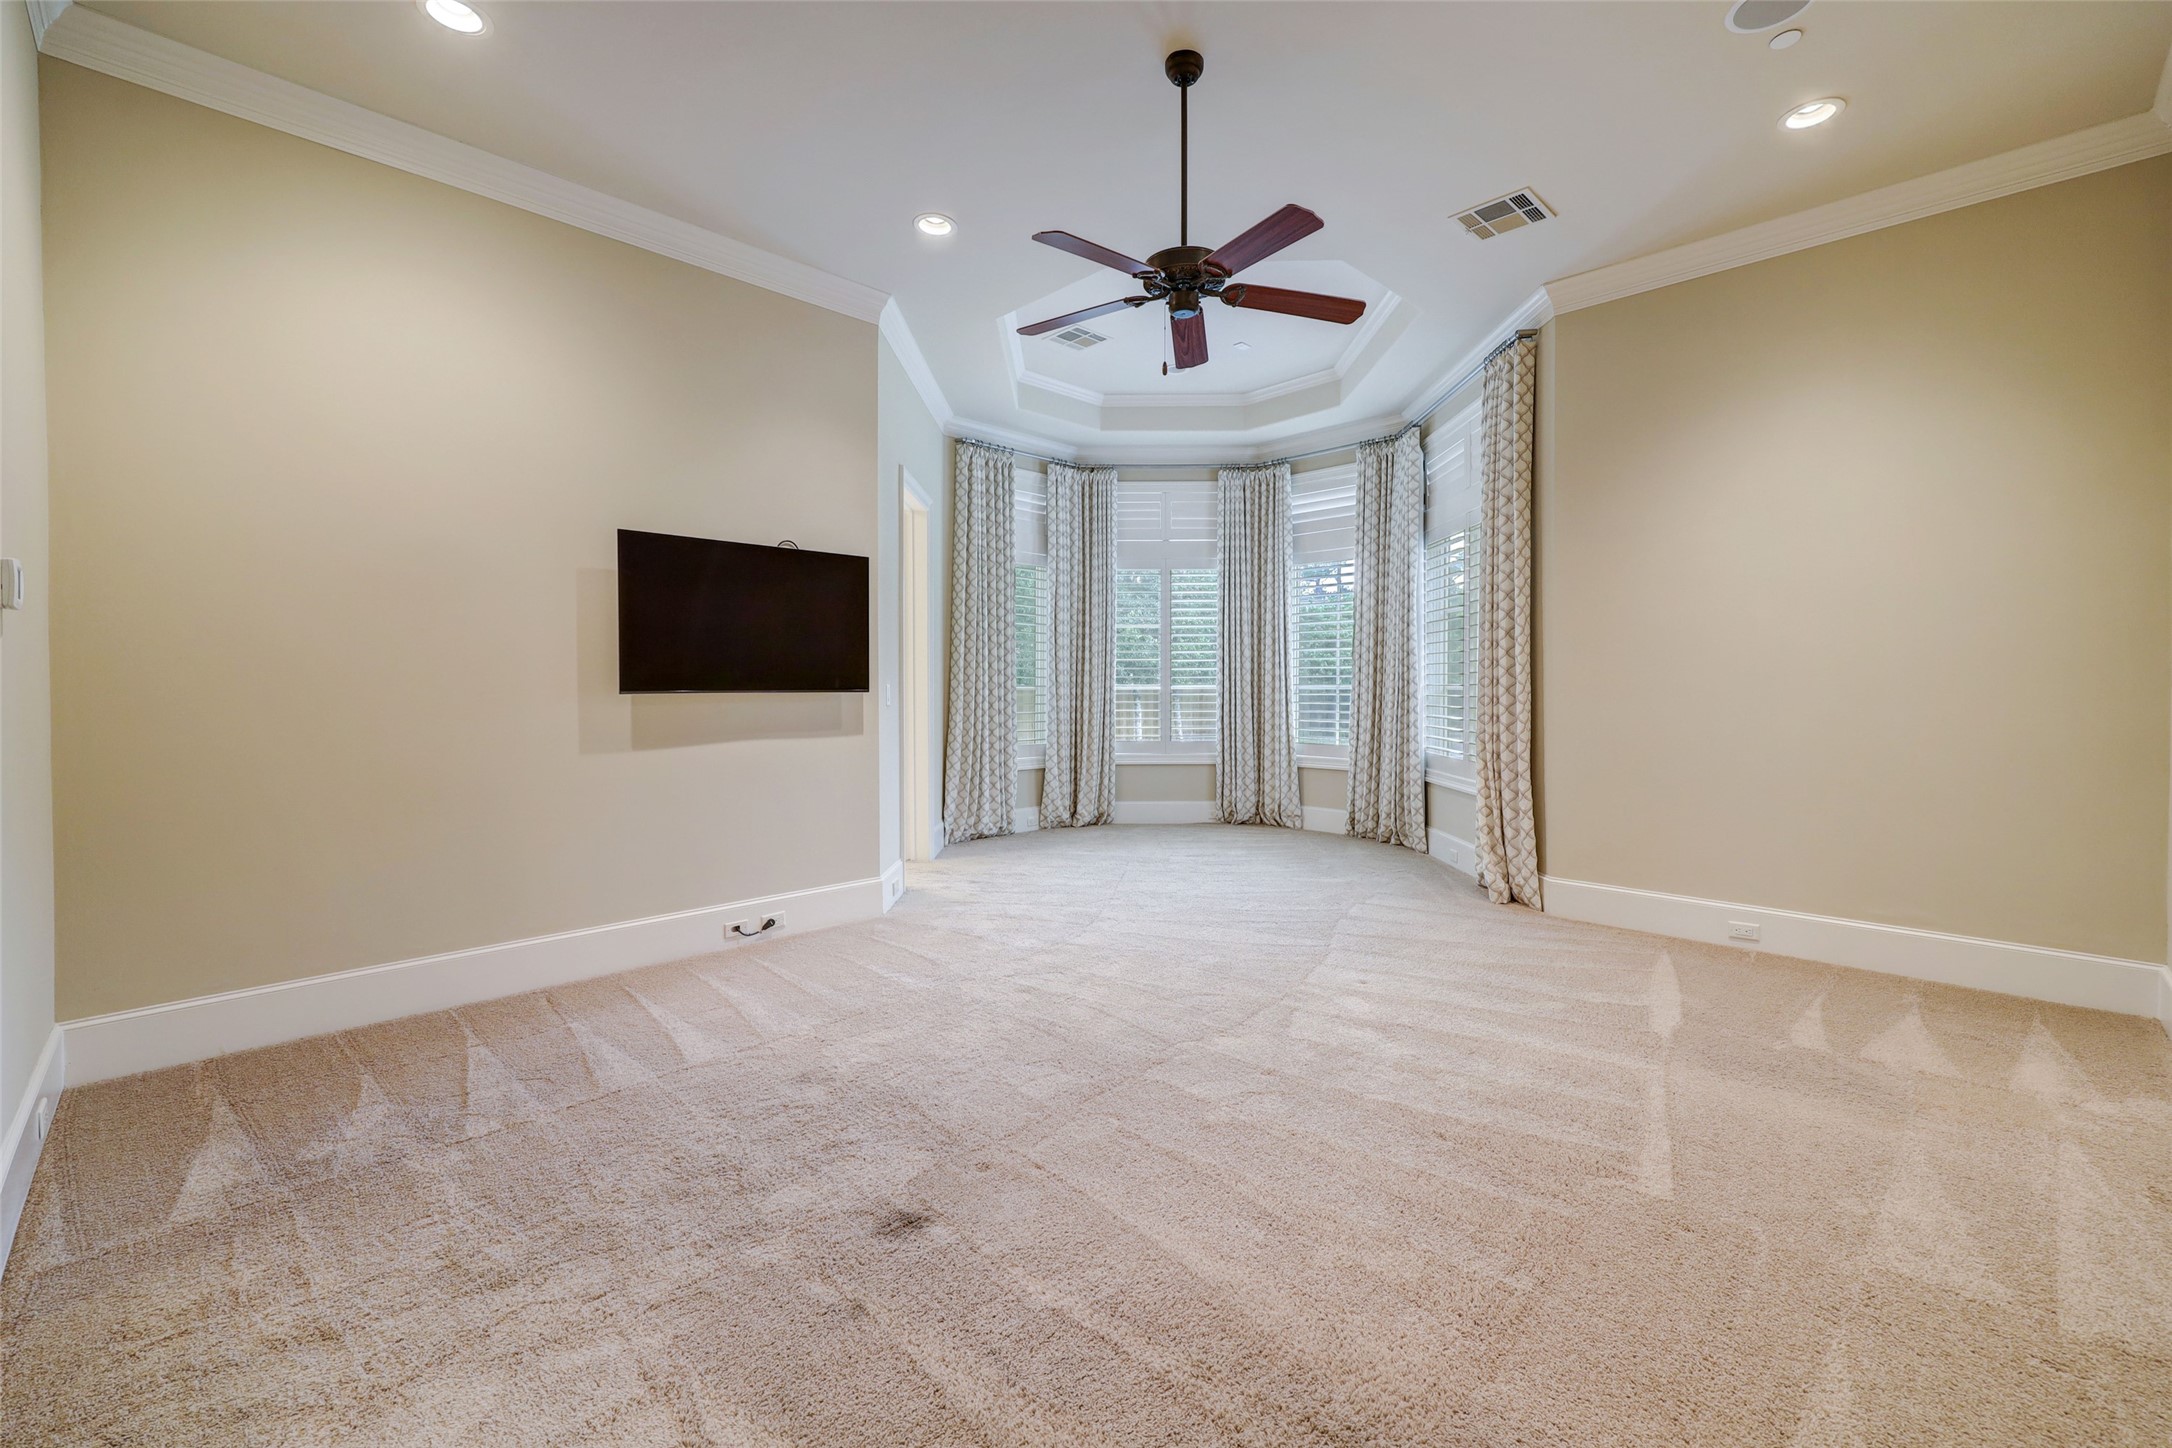 Features within the Master Suite are double crown moulding, a cove ceiling, and surround sound.  The Master wing also has its own thermostat for your sleeping comfort. A bay of windows allows you to view the world you left behind outside.